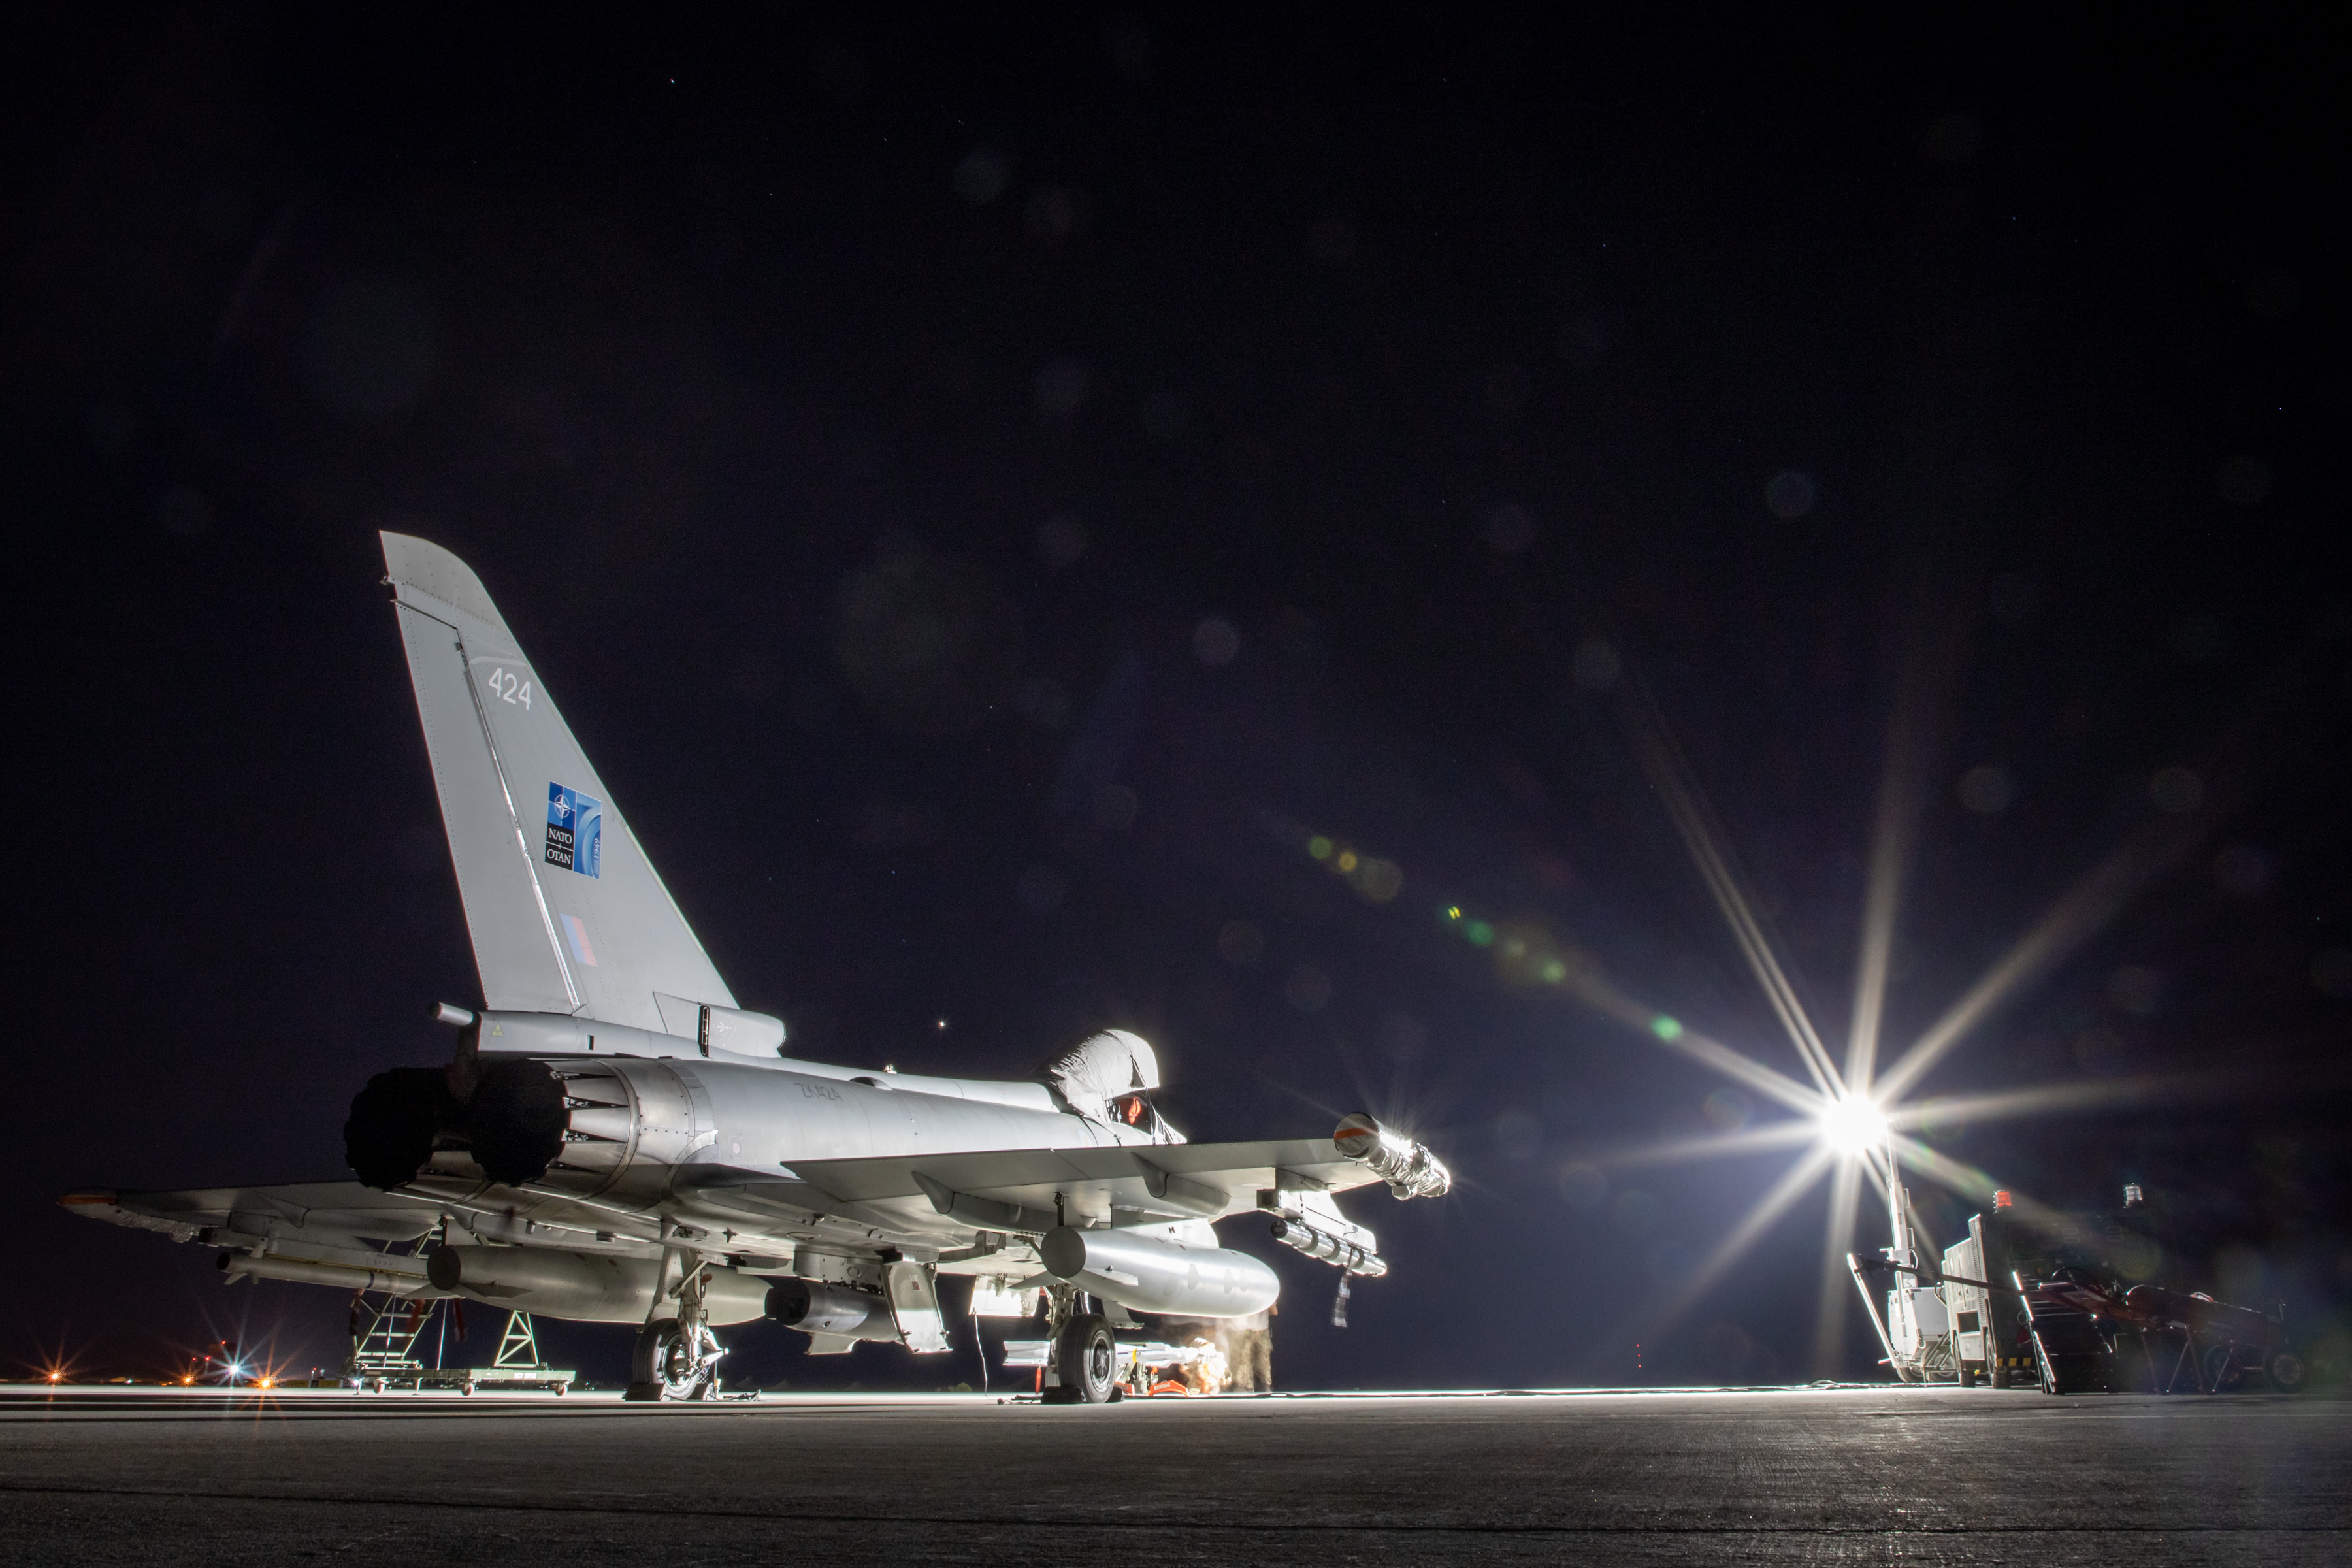 Jet aircraft on the airfield at night, strobe light casts rays.